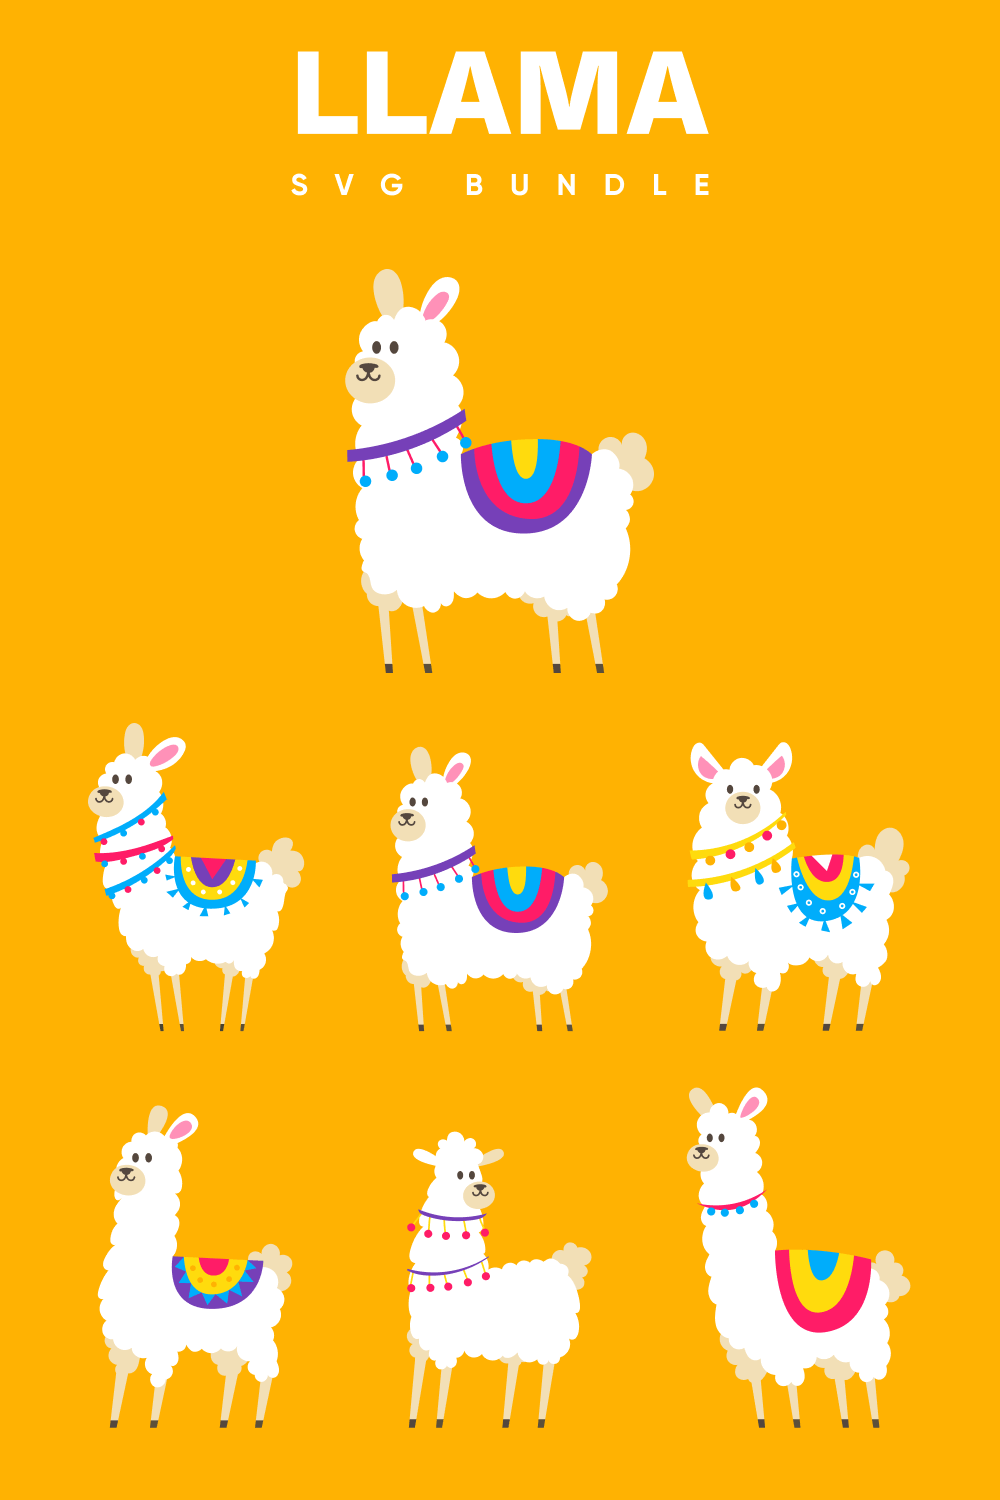 Six lamas with different facial expressions and moods.